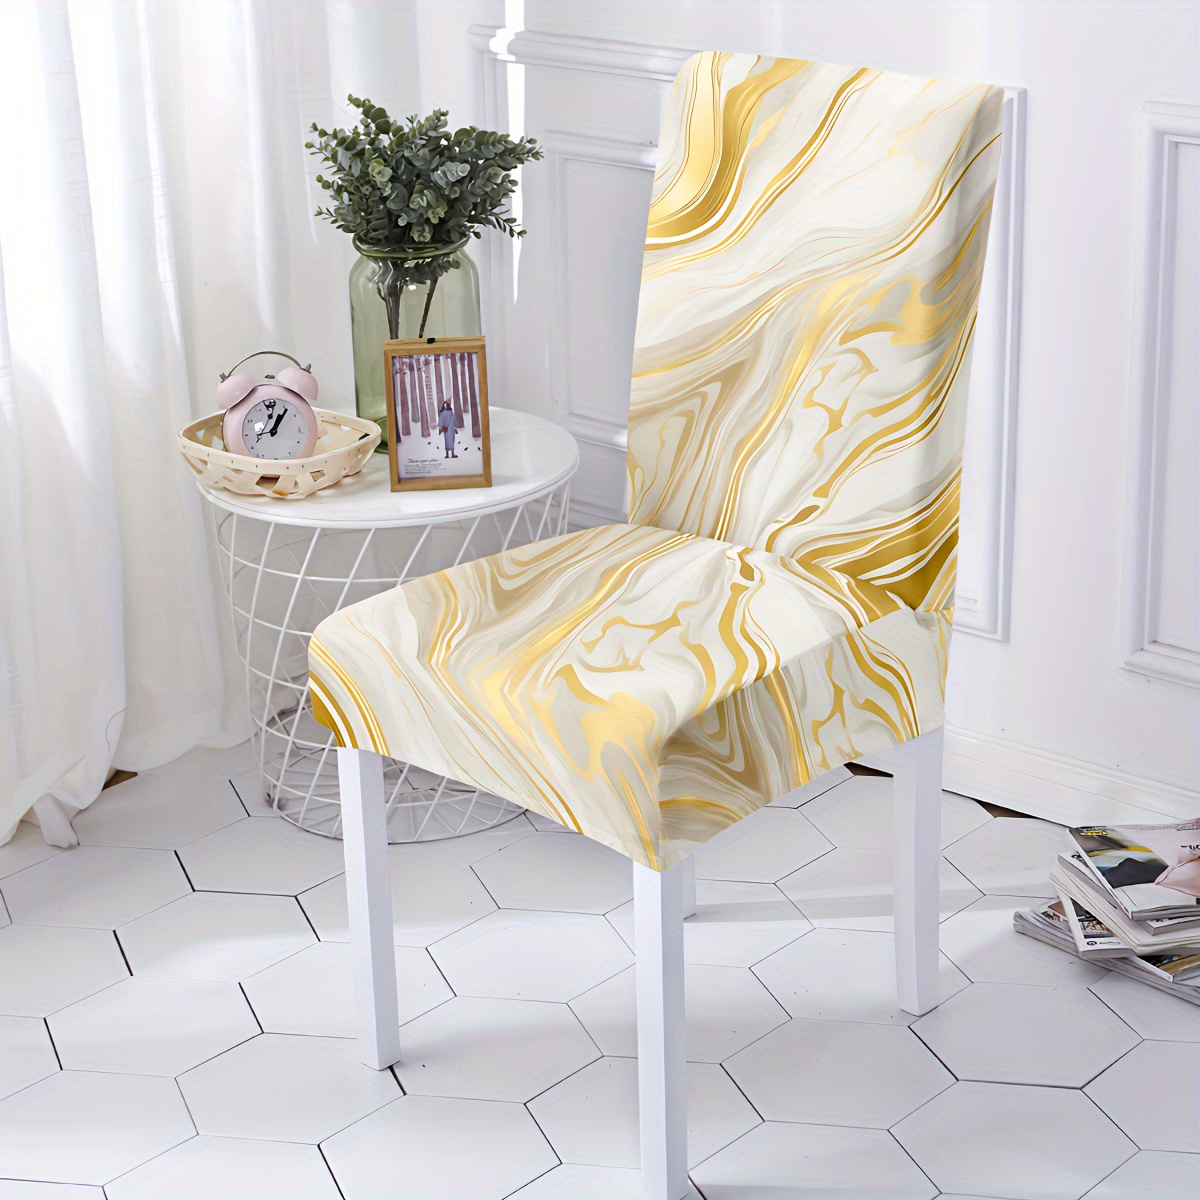 

Elegant Golden Marble Chair Covers - 4/6 Pieces, Stretchy Milk Silk Fabric, Machine Washable, Suitable For Home, Hotel, Restaurant, And Garden Chairs